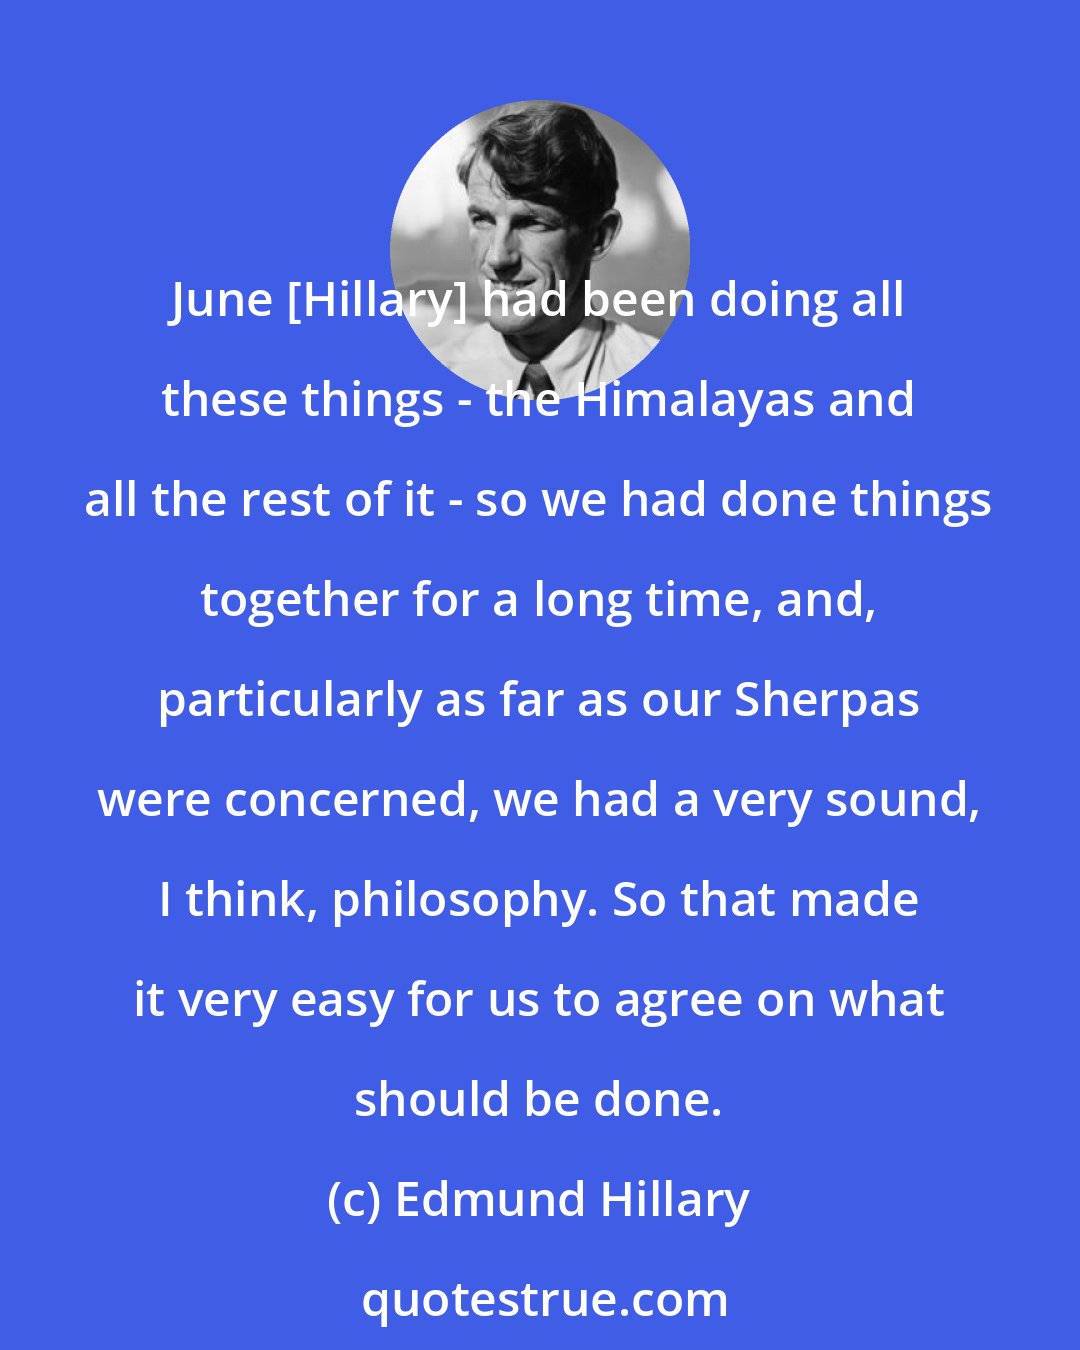 Edmund Hillary: June [Hillary] had been doing all these things - the Himalayas and all the rest of it - so we had done things together for a long time, and, particularly as far as our Sherpas were concerned, we had a very sound, I think, philosophy. So that made it very easy for us to agree on what should be done.